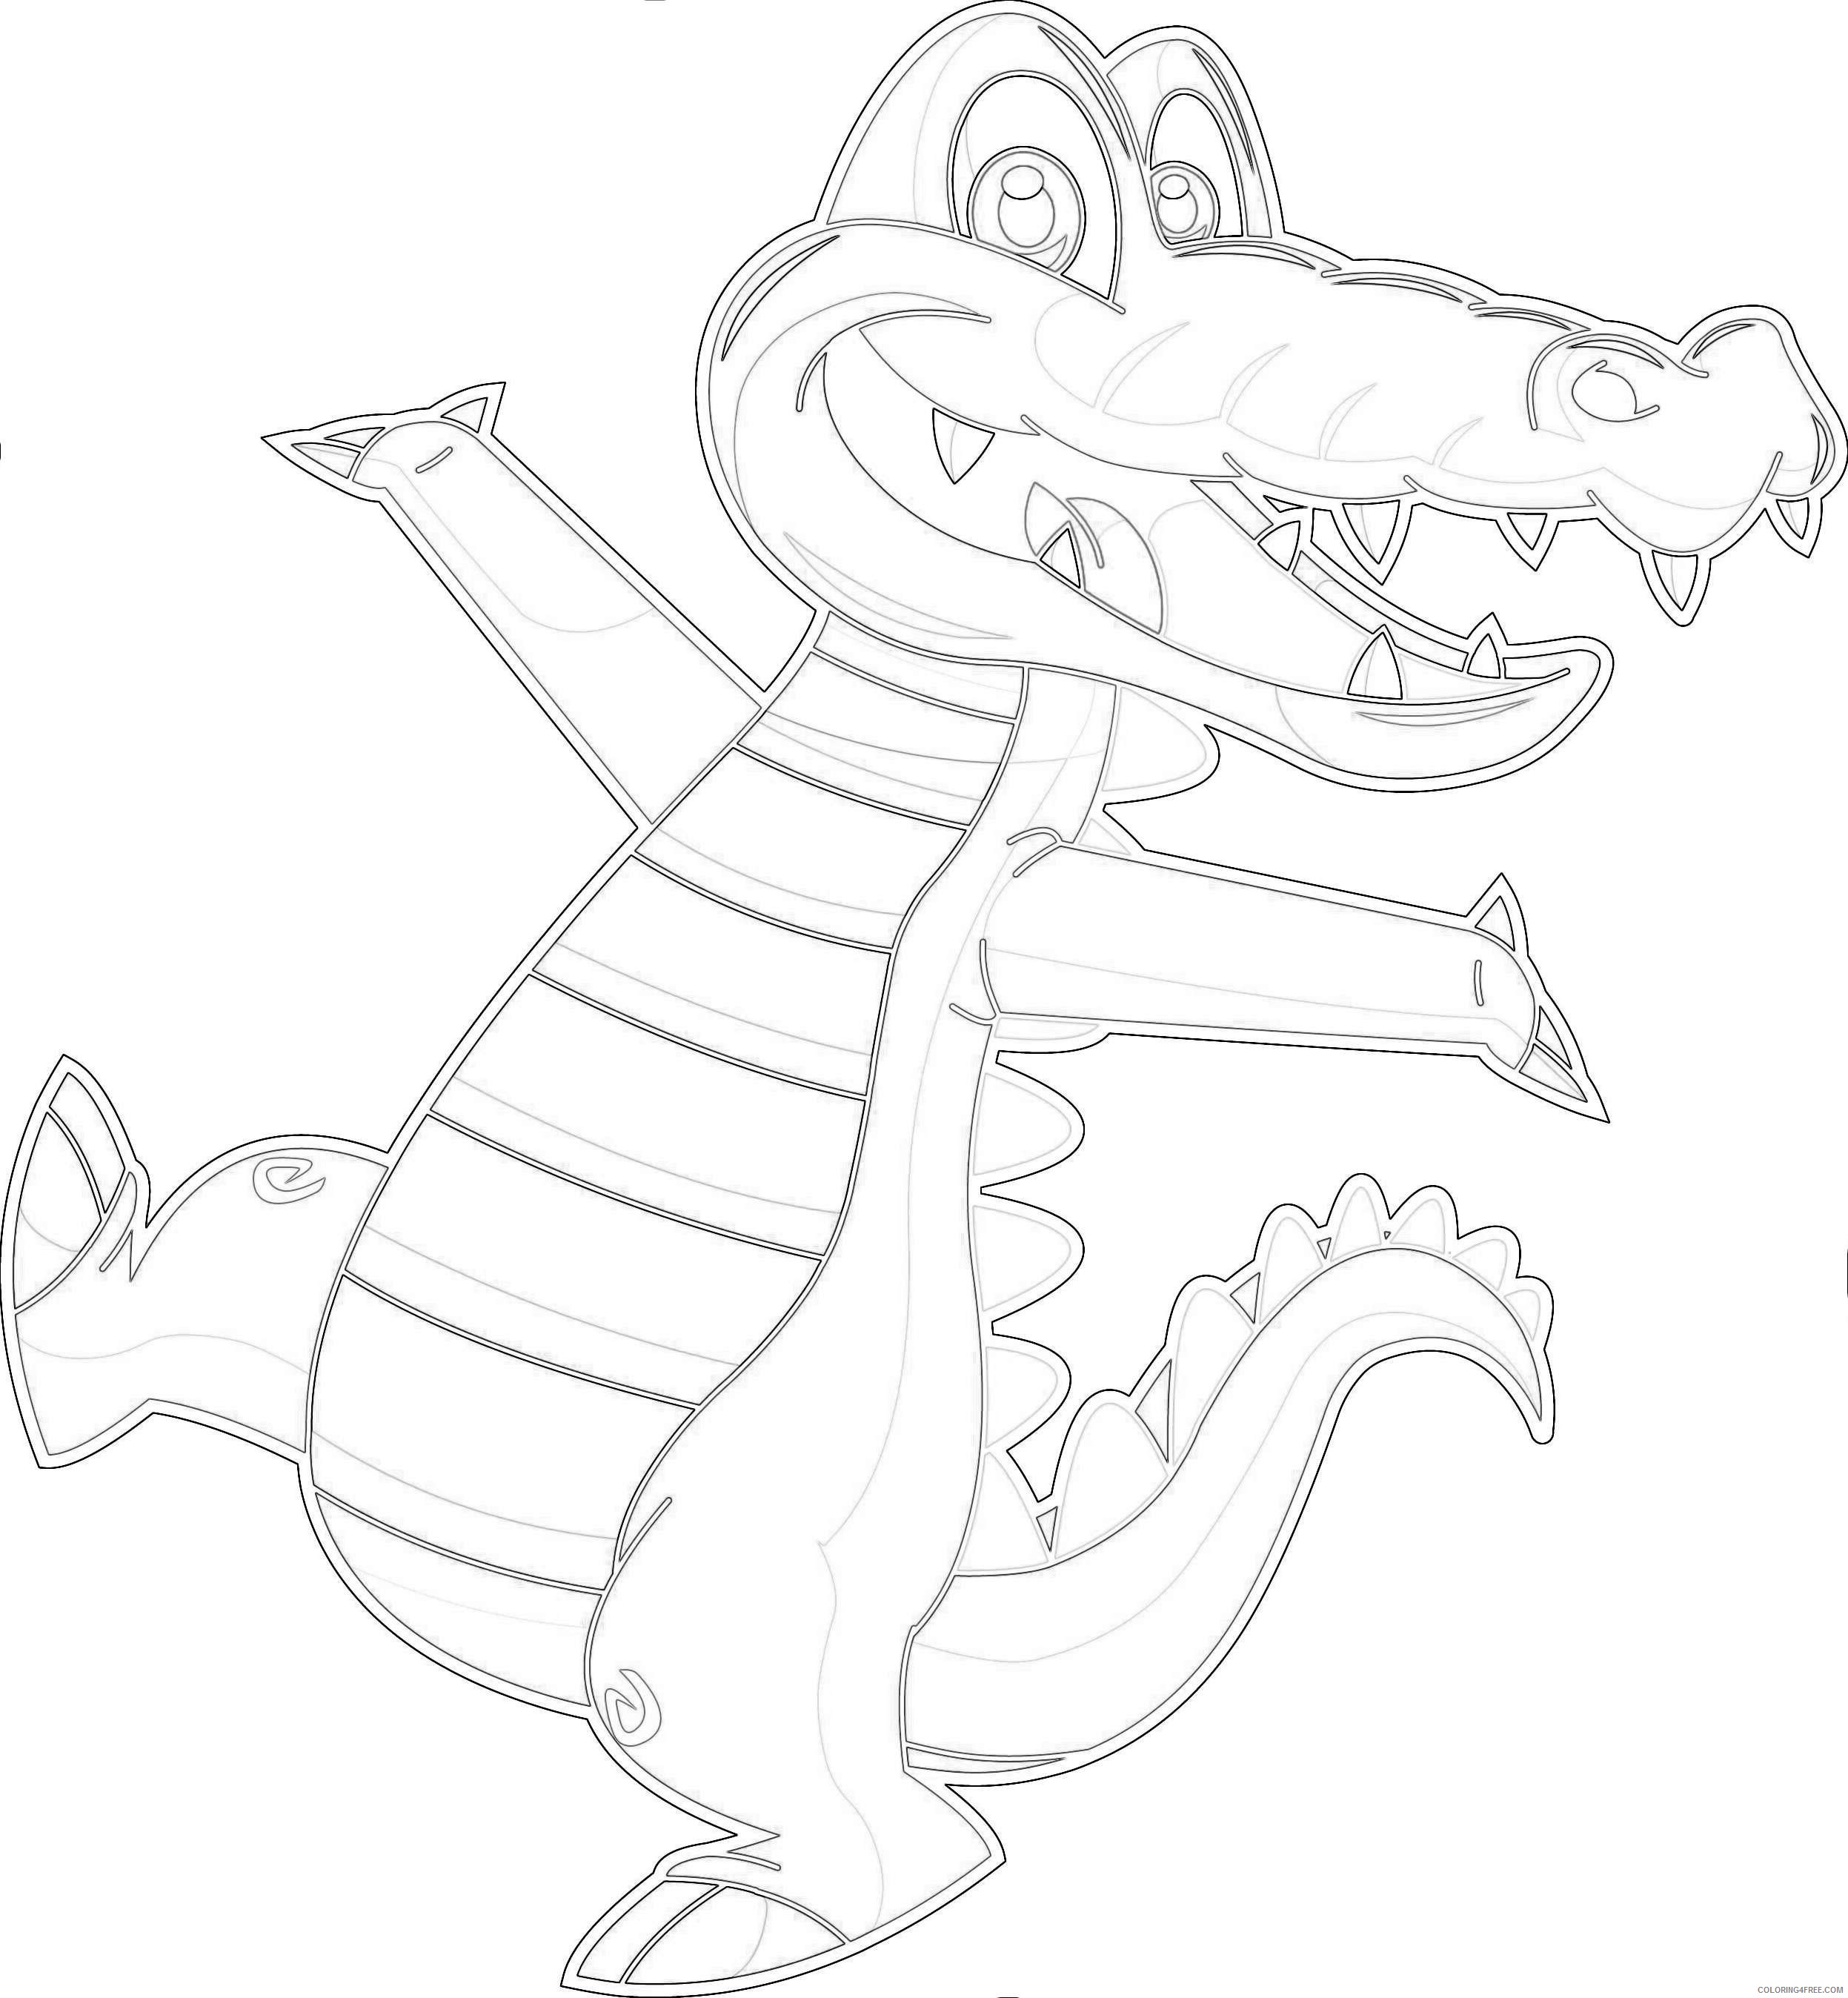 Simple Cute Alligator Coloring Pages for Kids